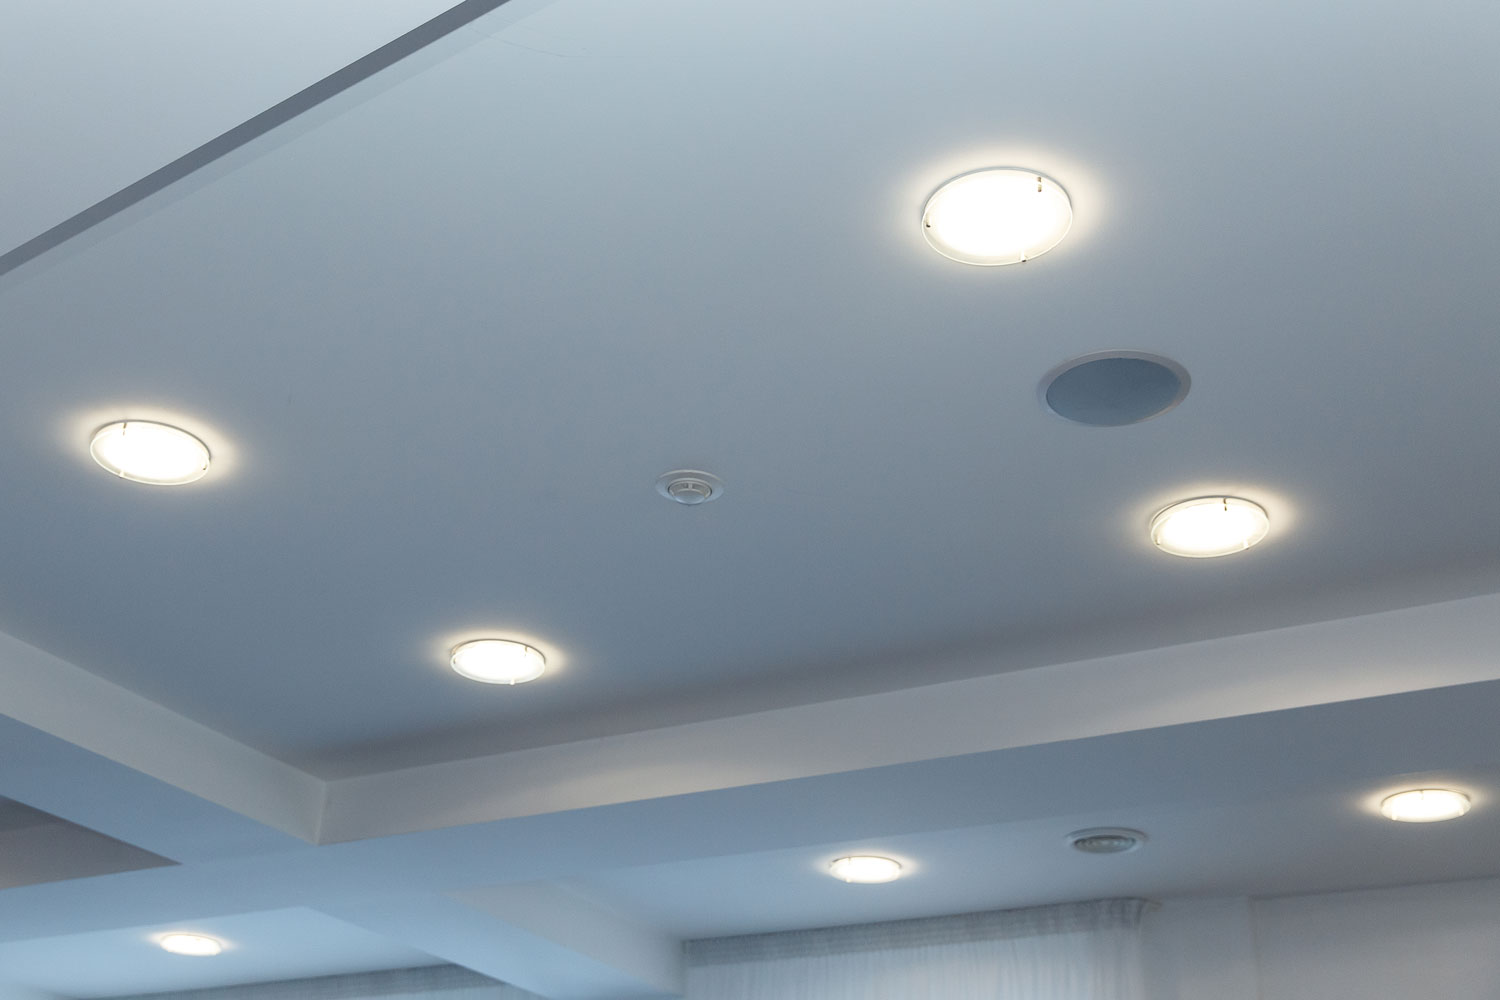 Reccessed ceiling lights on a white ceiling